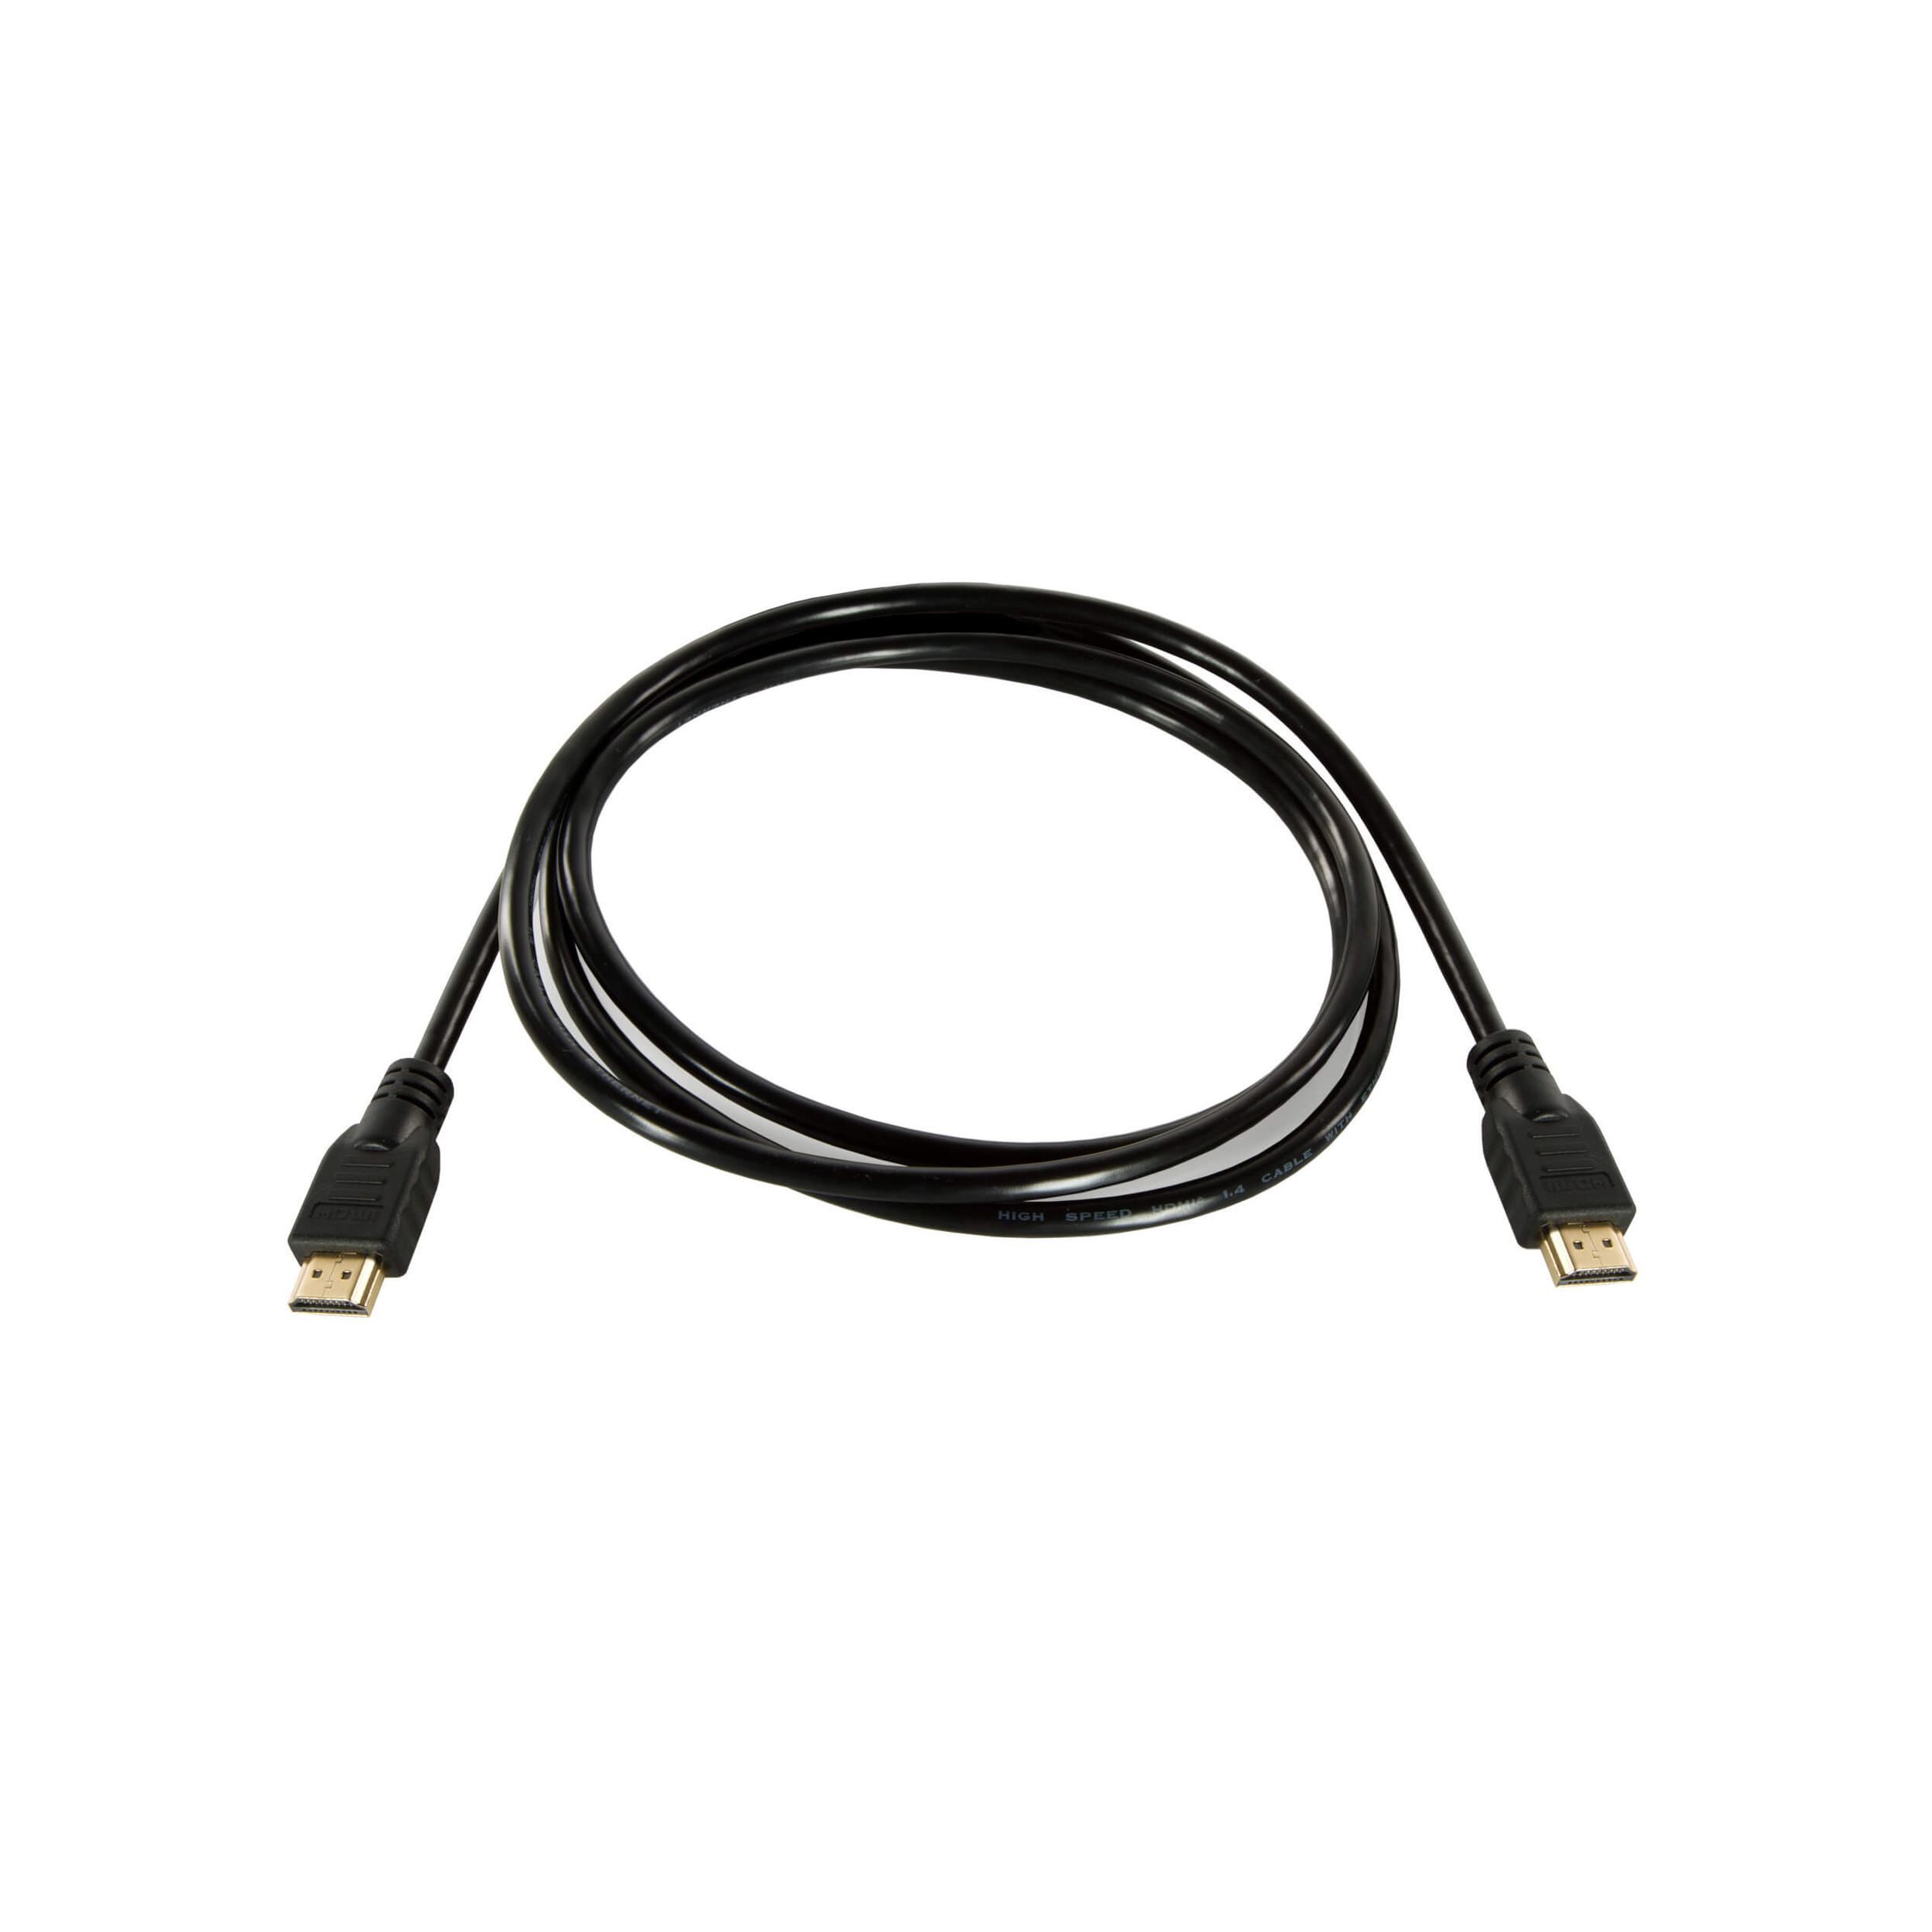 SHAPE High-Speed HDMI Cable (5')